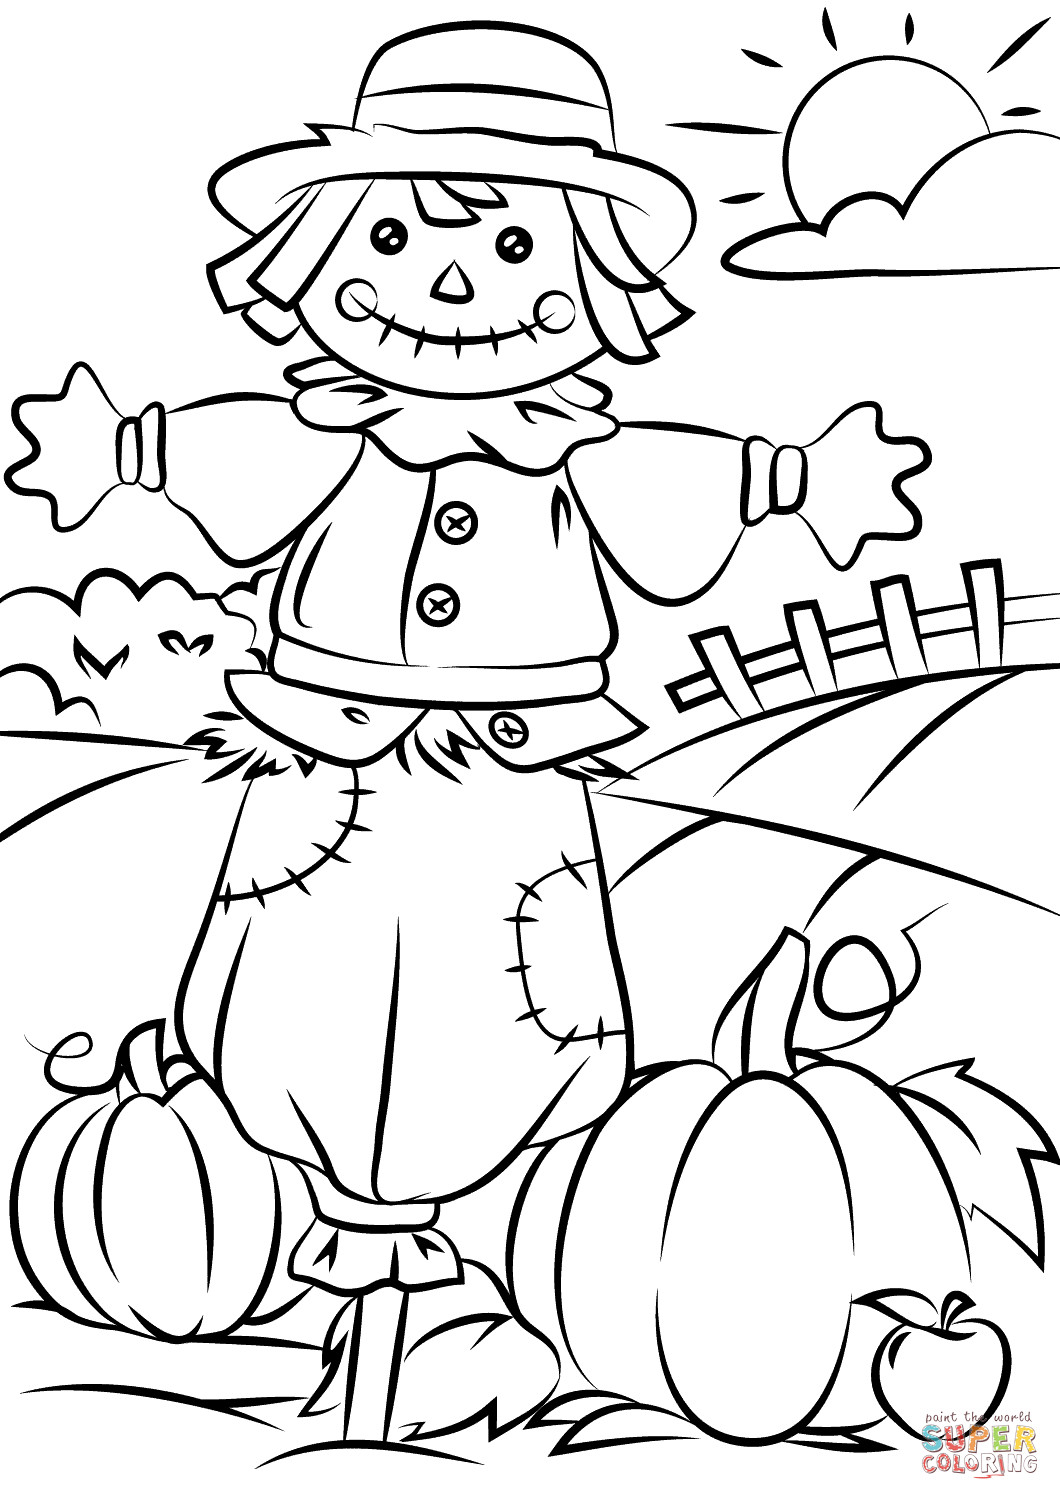 Coloring Pages For Kids Fall
 Coloring Autumn Scene with Scarecrow Coloring Page Free